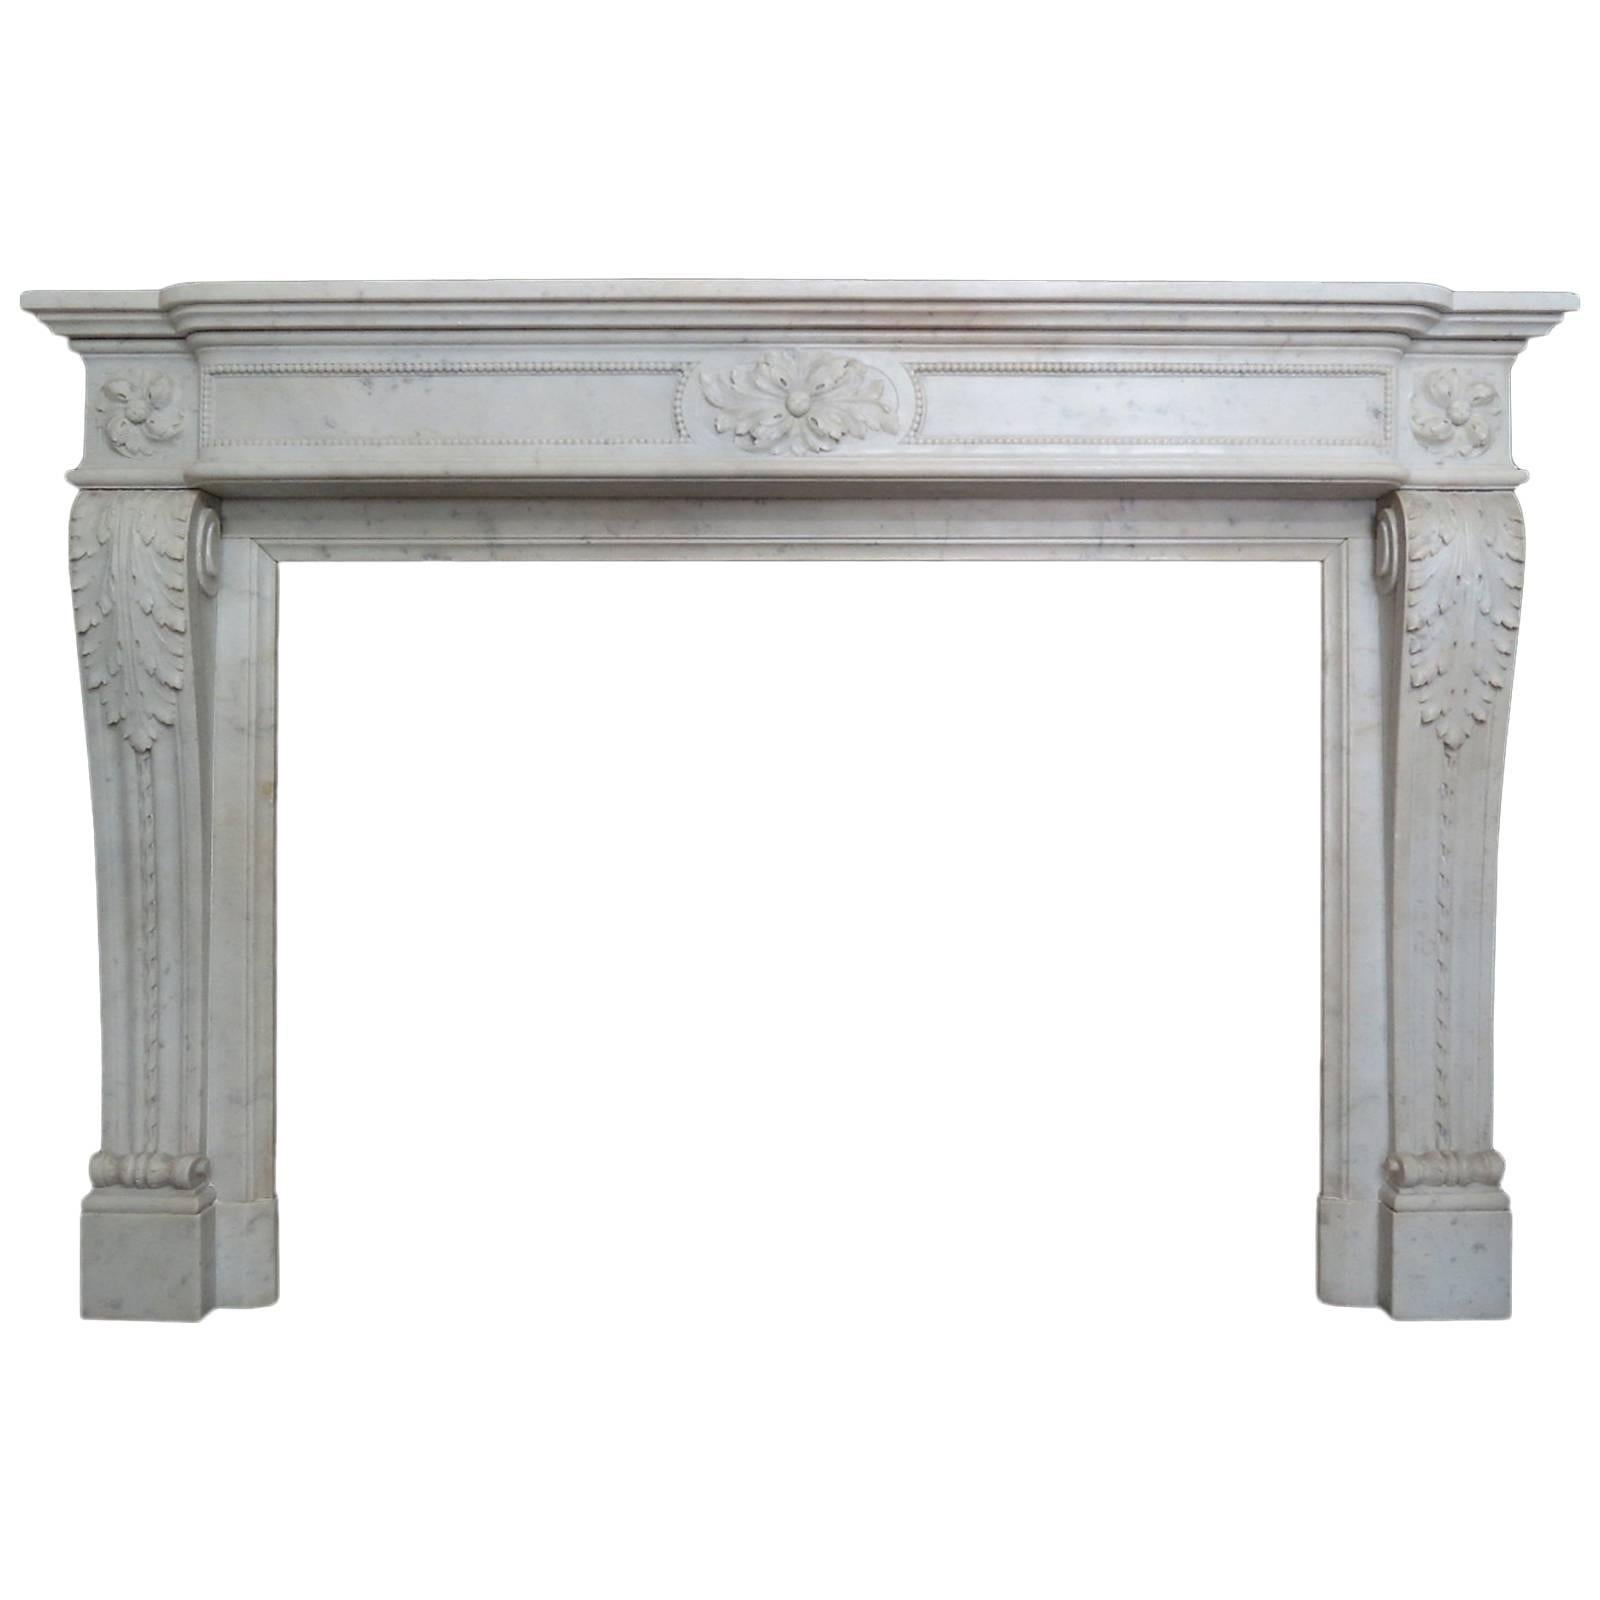 Antique French Louis XVI Style Carved Marble Fireplace Mantel